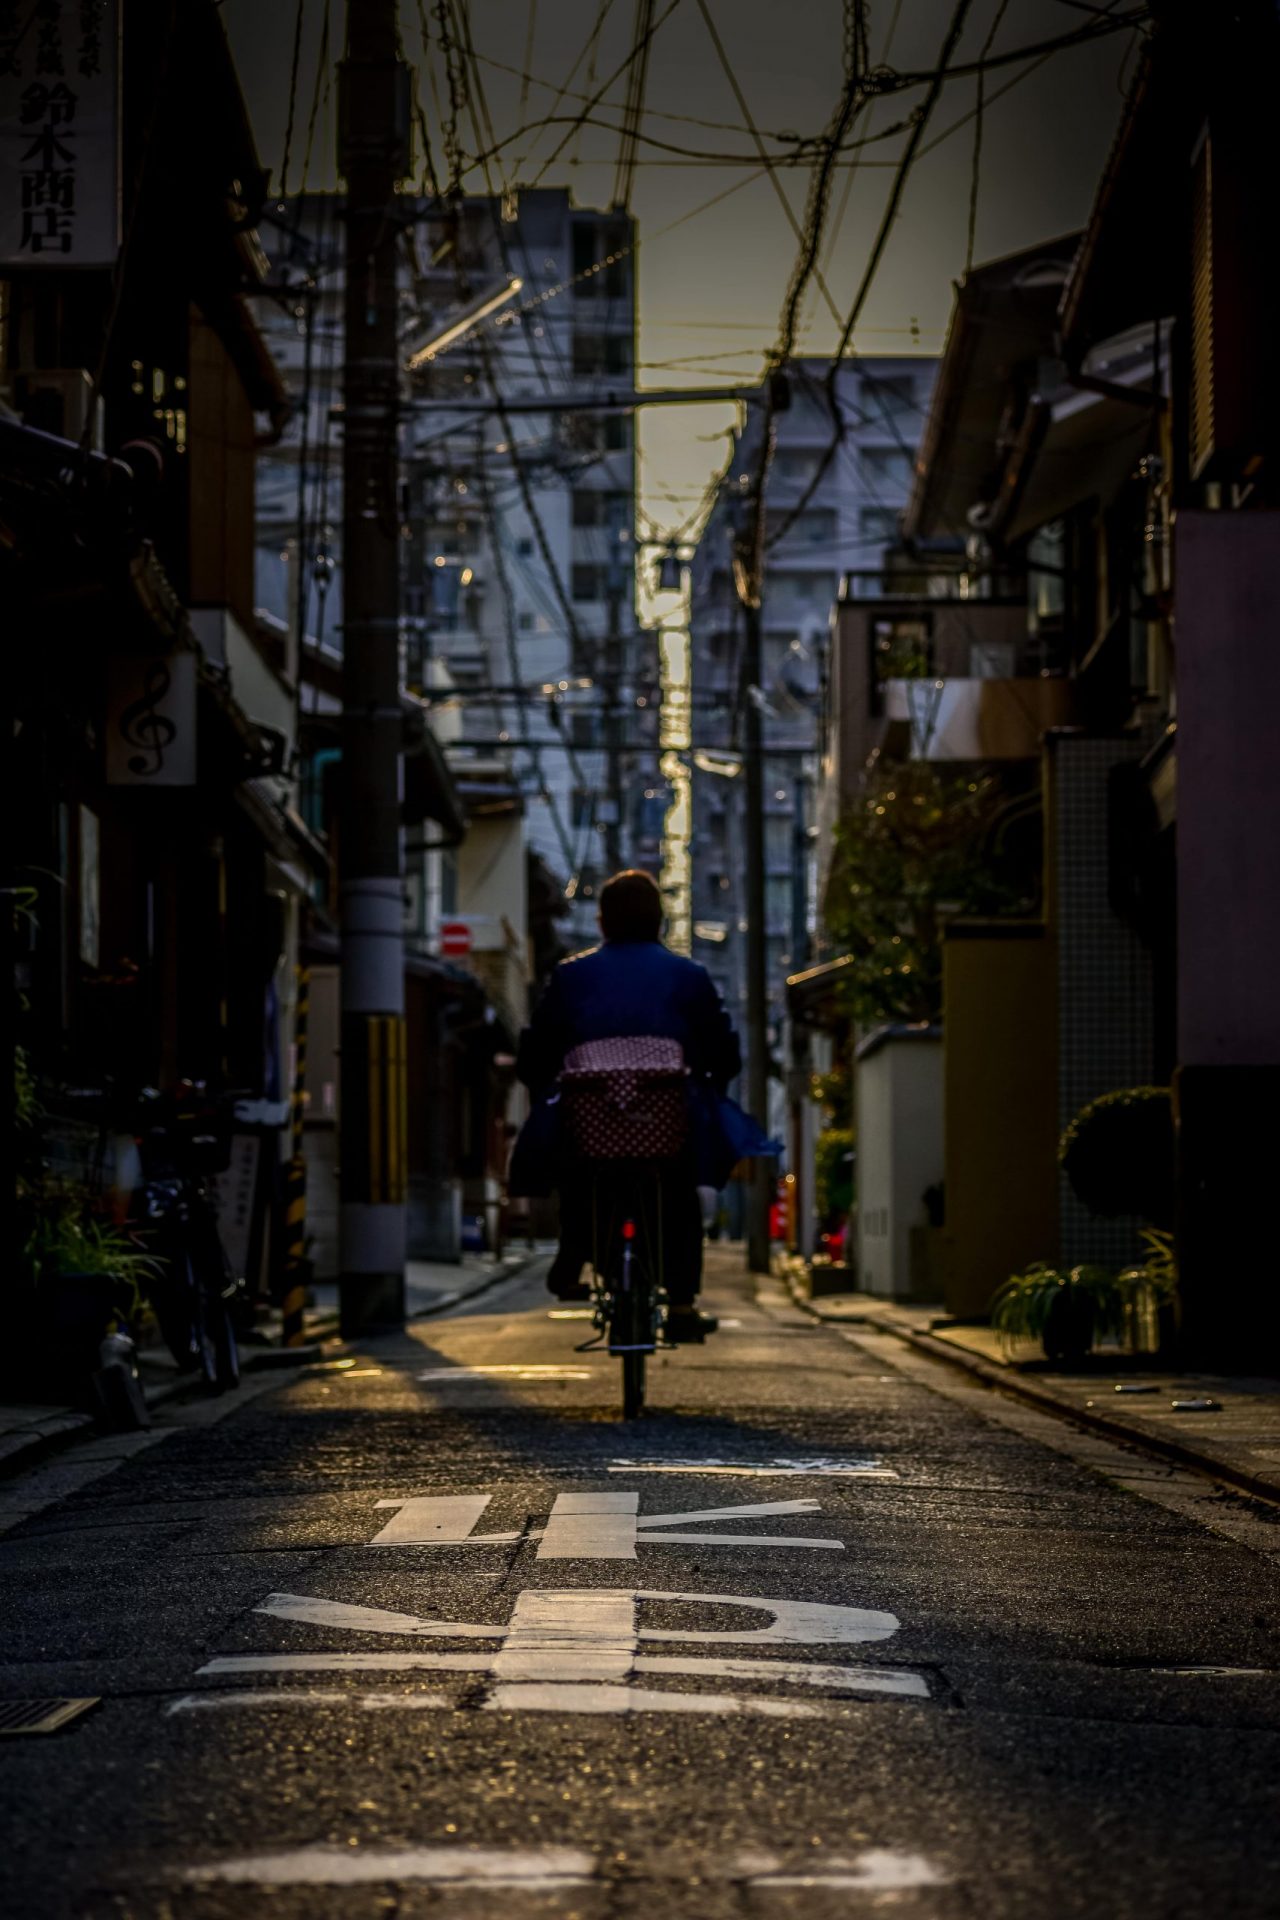 Biking home after a long day in Kyoto street photography